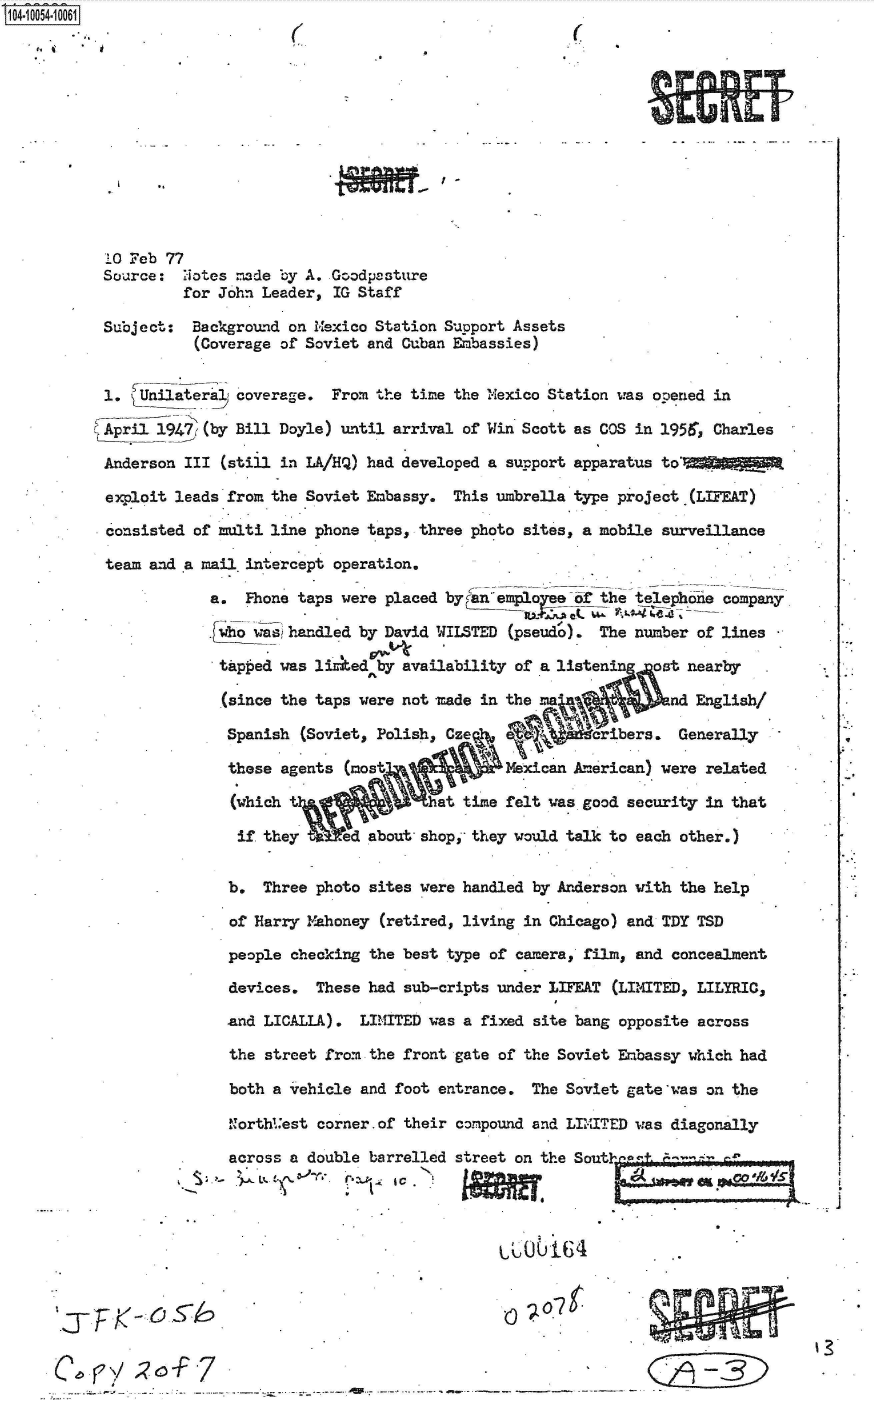 handle is hein.jfk/jfkarch36093 and id is 1 raw text is: 04 0054-10001













           10 Feb 77
           Source:  Notes =de  by A. Goodpasture
                    for John Leader, IG Staff

           Subject:  Background on Mexico Station Support Assets
                     (Coverage of Soviet and Cuban Embassies)


           1.  Unilateral coverage. From the time the Mexico Station was opened in

           April 1947 (by Bill Doyle) until arrival of Win Scott as COS in 1951r, Charles

           Anderson III (still in LA/HQ) had developed a support apparatus to'

           exploit leads from the Soviet Embassy. This umbrella type project (LIFEAT)

           consisted of multi line phone taps, three photo sites, a mobile surveillance

           team and a mail.intercept operation.

                       a.  Fhone taps were placed byan empoe of the telephone company

                       .ho  washandled by David WILSTED (pseudo).  The number of lines

                       tap  ed was lirked by availability of a listenin  ost nearby

                       (since  the taps were not made in the               ad English/

                         Spanish (Soviet, Polish, Cze   a           ibers.  Generally

                         these agents (most             Mexican Am rican) were related

                         (which                hat time felt was good security in that

                         if  they .ed about shop,  they would talk to each other.)


                         b.  Three photo sites were handled by Anderson with the help

                         of Harry Mahoney (retired, living in Chicago) and TDY TSD

                         people checking the best type of camera, film, and concealment

                         devices.  These had sub-cripts under LIFEAT (LIMITED, LILYRIC,

                         and LICALLA).  LIMITED was a fixed site bang opposite across

                         the street from the front gate of the Soviet Embassy which had

                         both a vehicle and foot entrance. The Soviet gate'was on the

                         Northl.'est corner.of their compound and LIITED was diagonally

                         across a double barrelled street on the Soutin'a+




                                      l0 164 .


